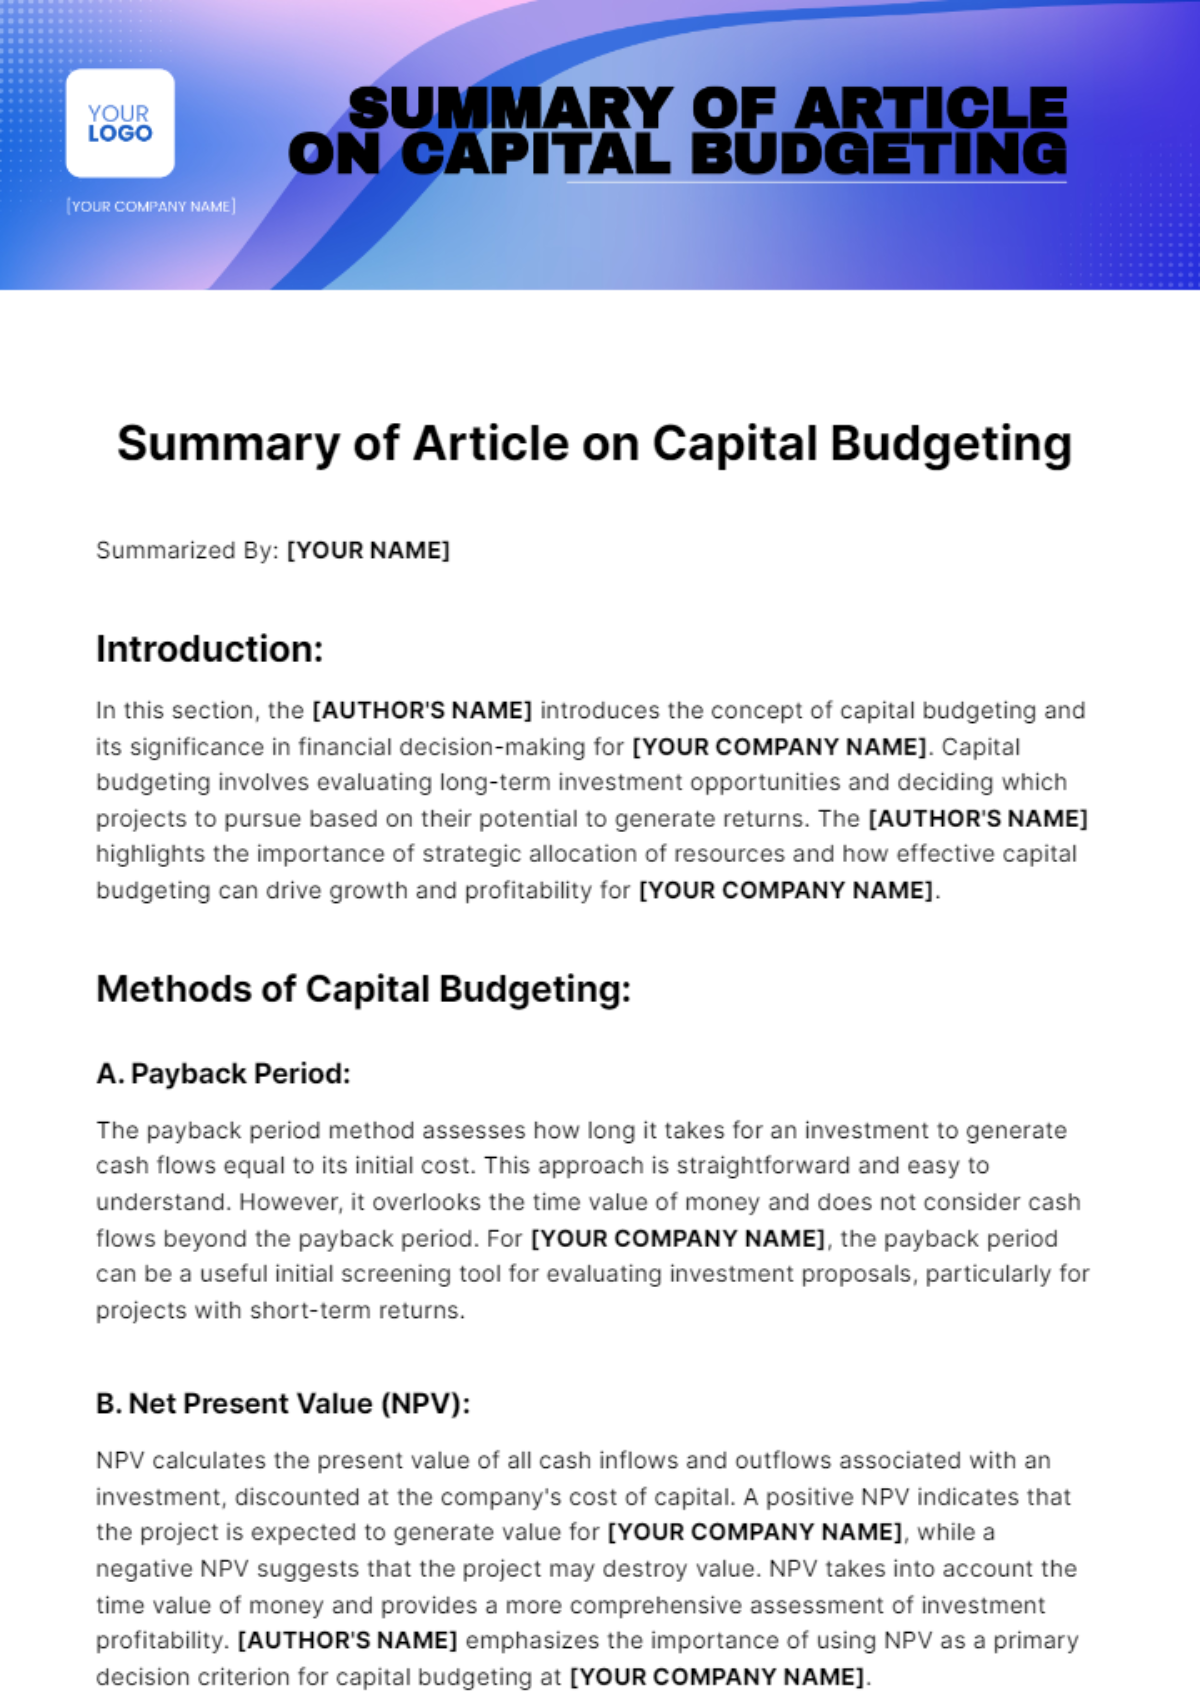 Free Summary of Article on Capital Budgeting Template